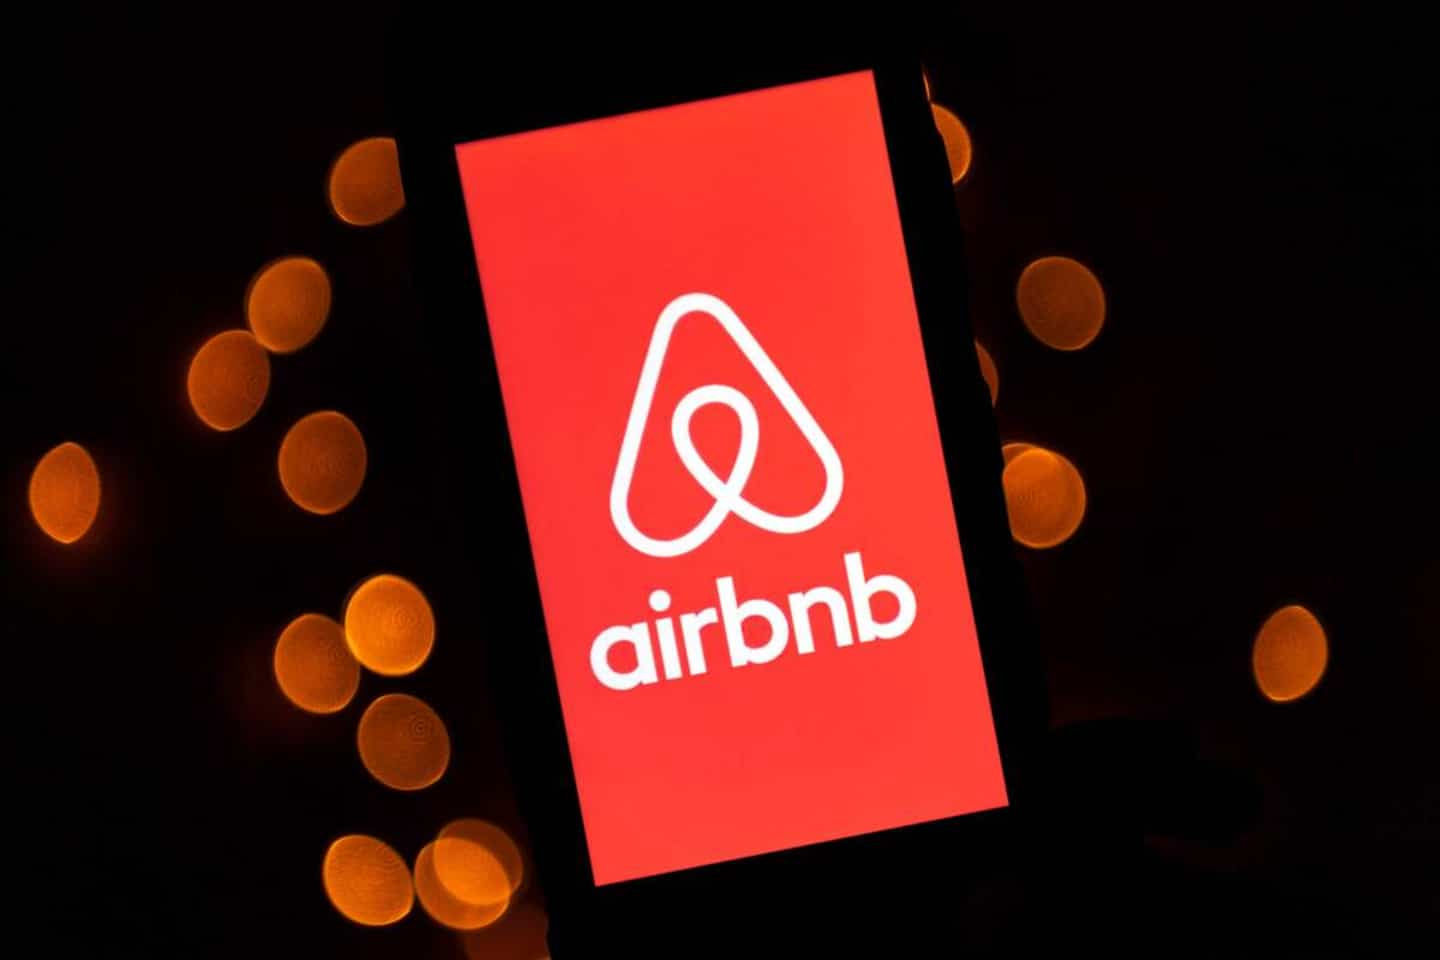 Airbnb is breaking up the New Year's Eve party